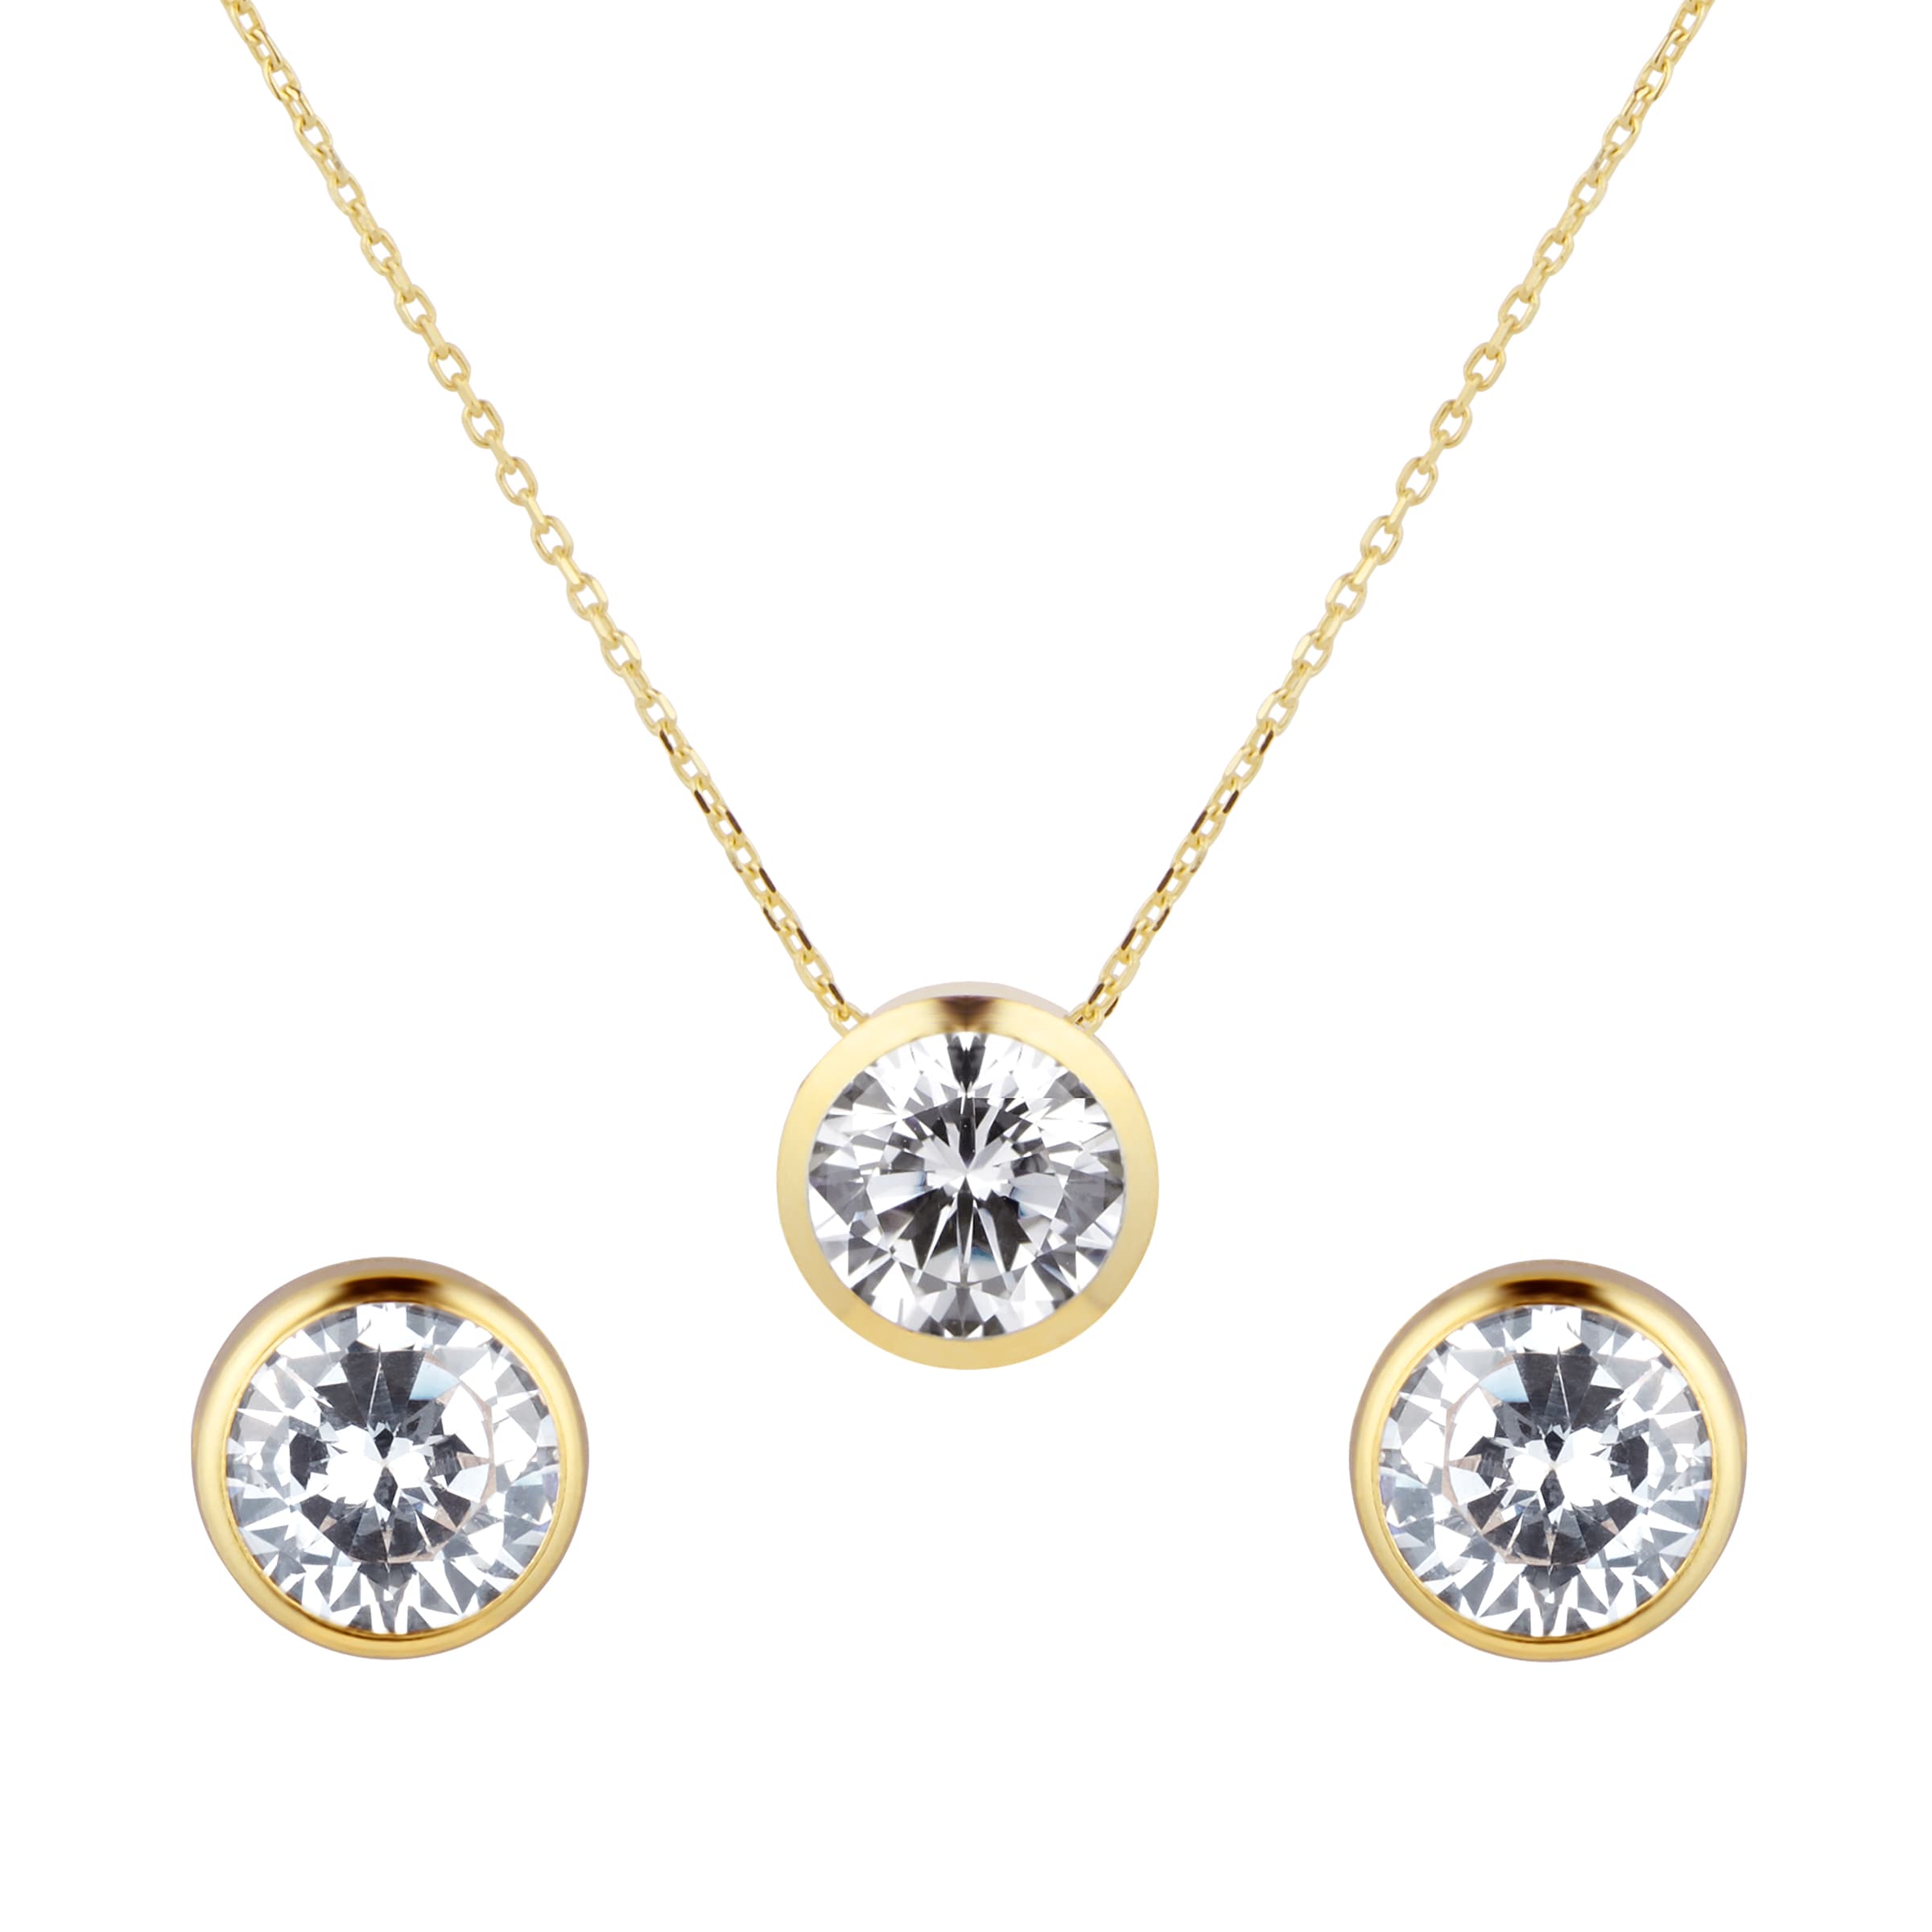 9ct Gold Heart Cubic Zirconia Necklace And Earrings Gift Set - G5016 |  F.Hinds Jewellers